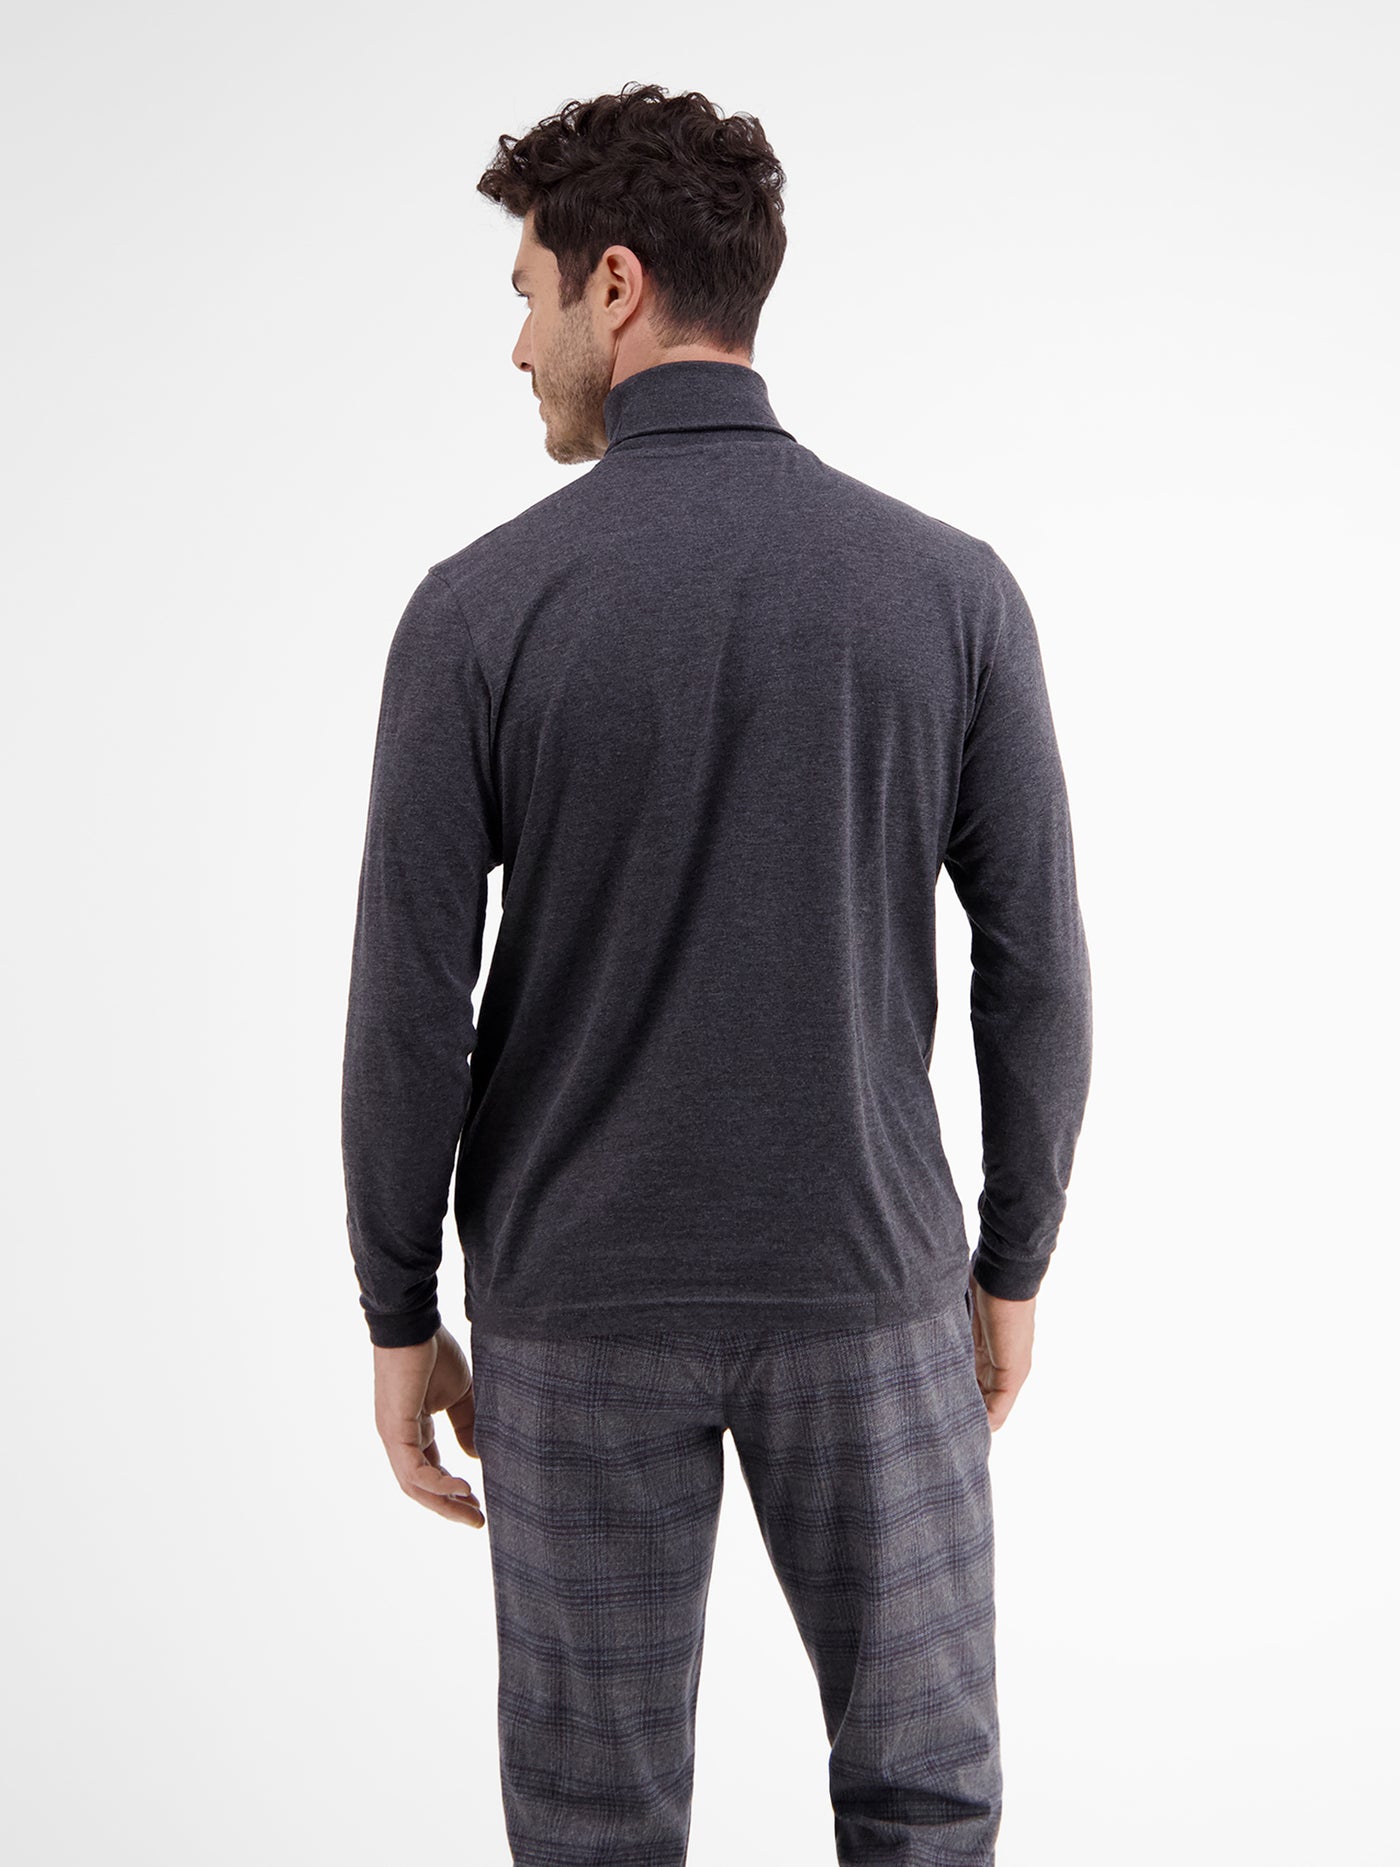 Turtleneck pullover in non-slip single jersey quality